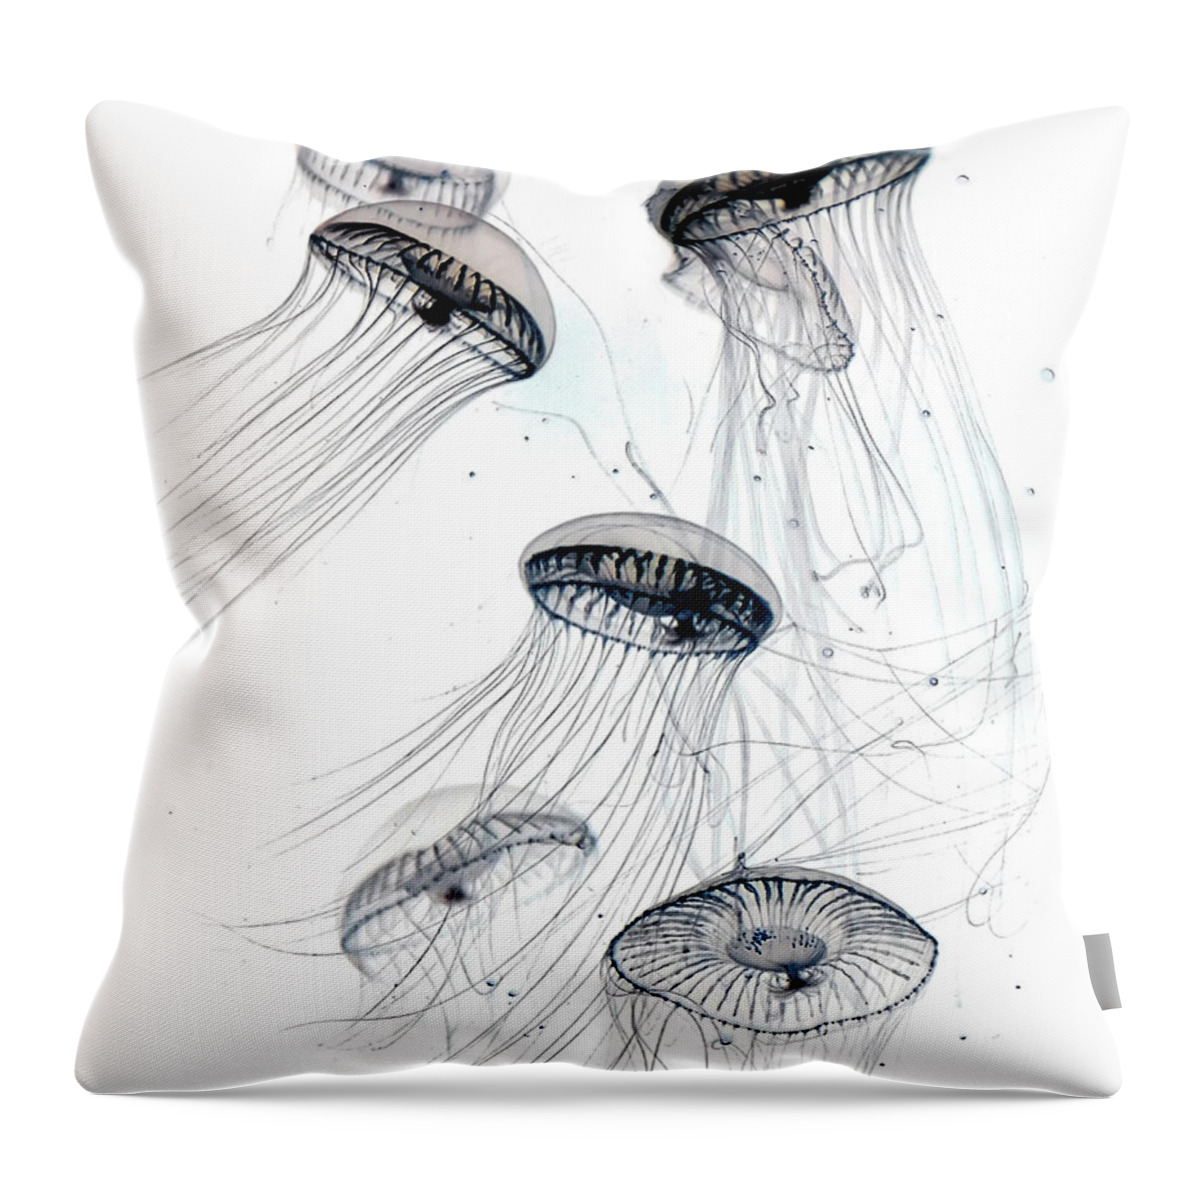 Jellyfish Throw Pillow featuring the photograph Little Jellyfish 2 by Endre Balogh